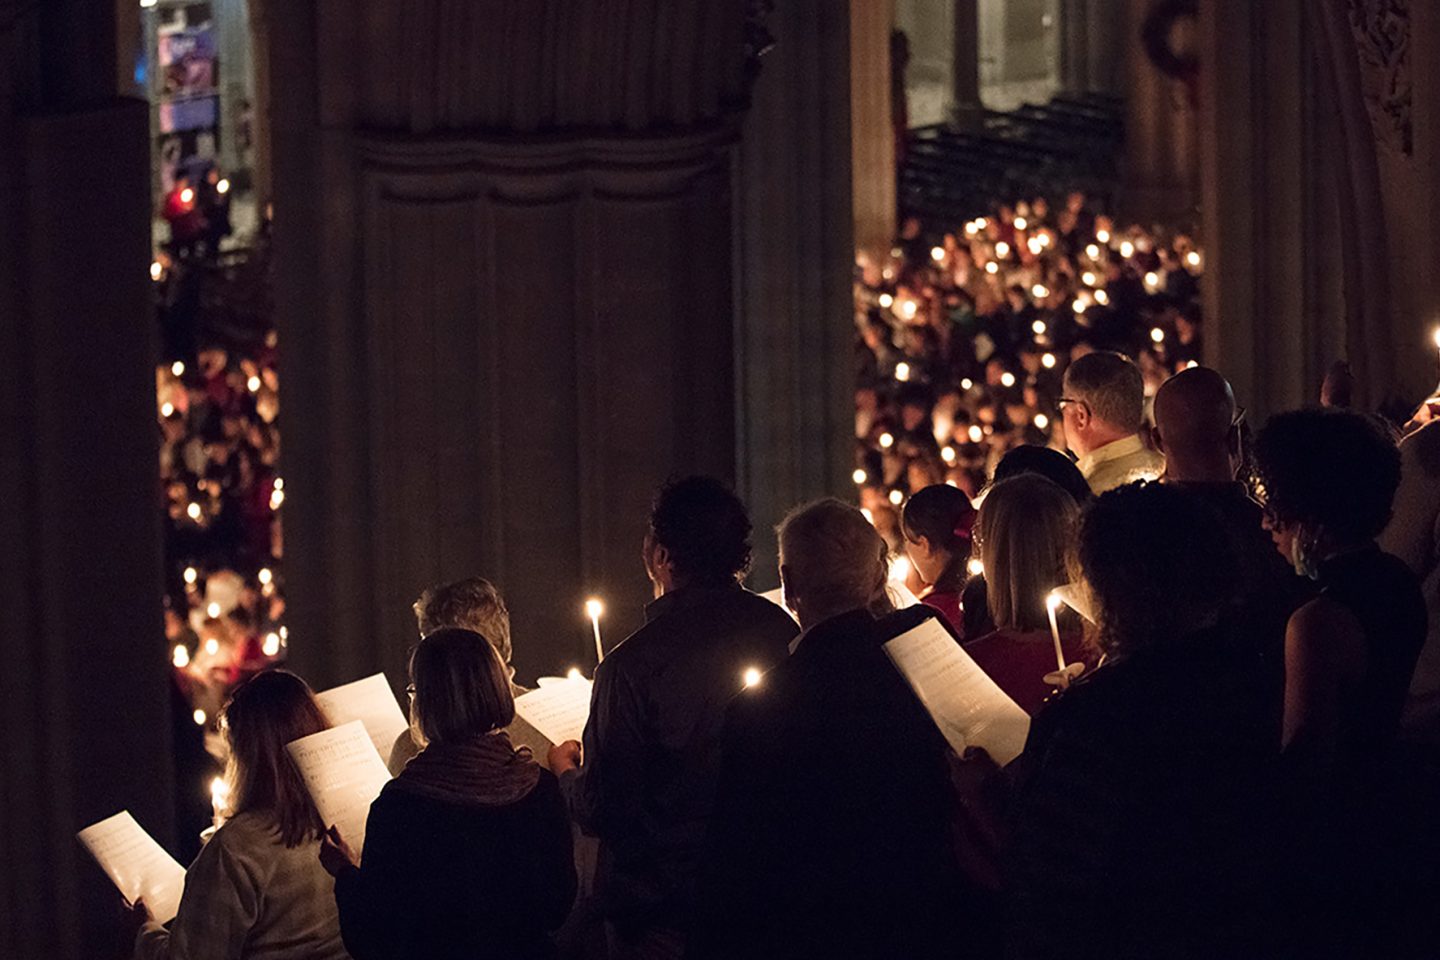 Service attendees hold candles during a hymn in the darkness of the nave.